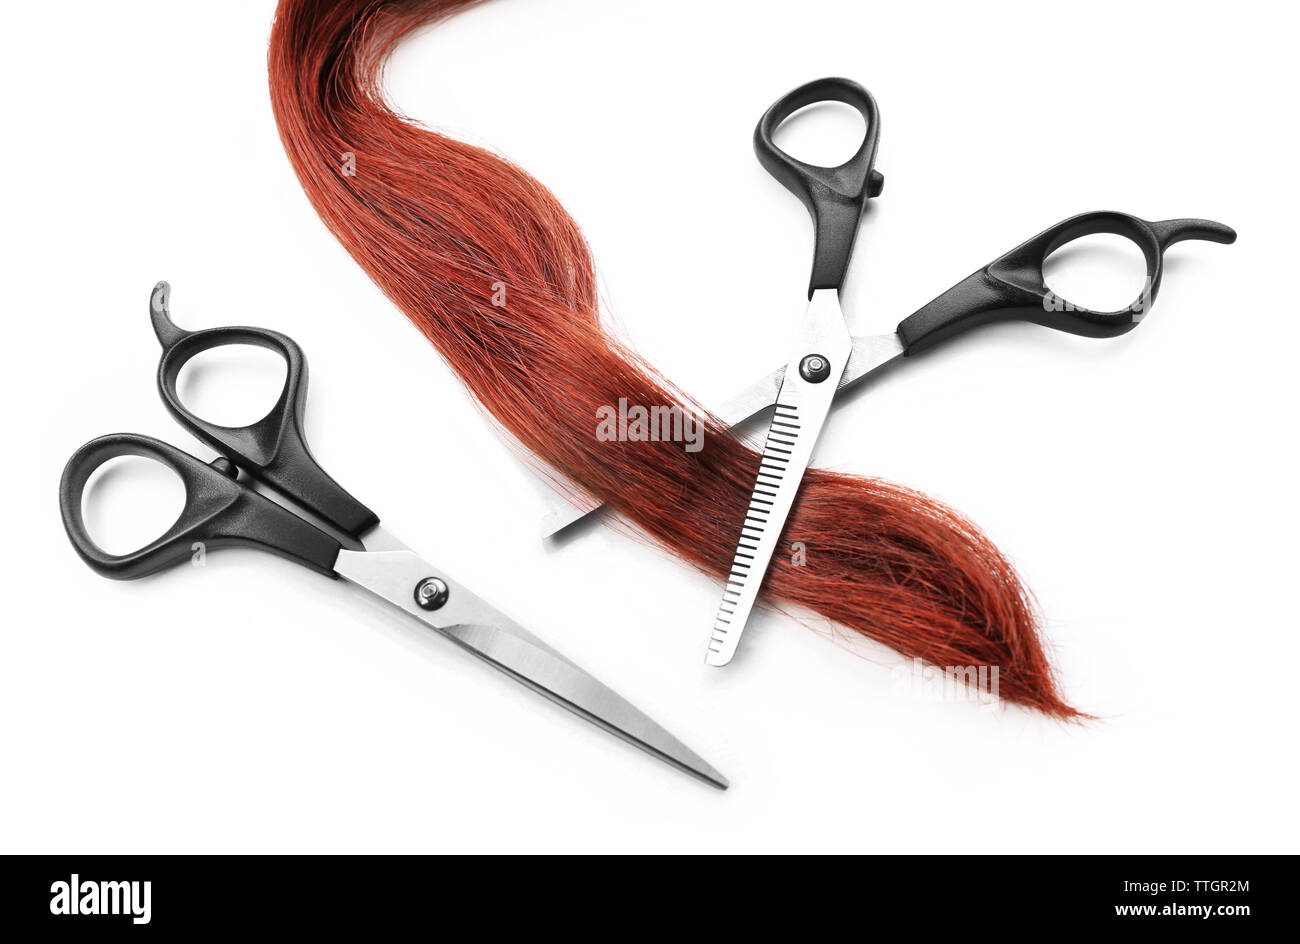 Hairdresser's scissors with strand of red hair, isolated on white Stock Photo